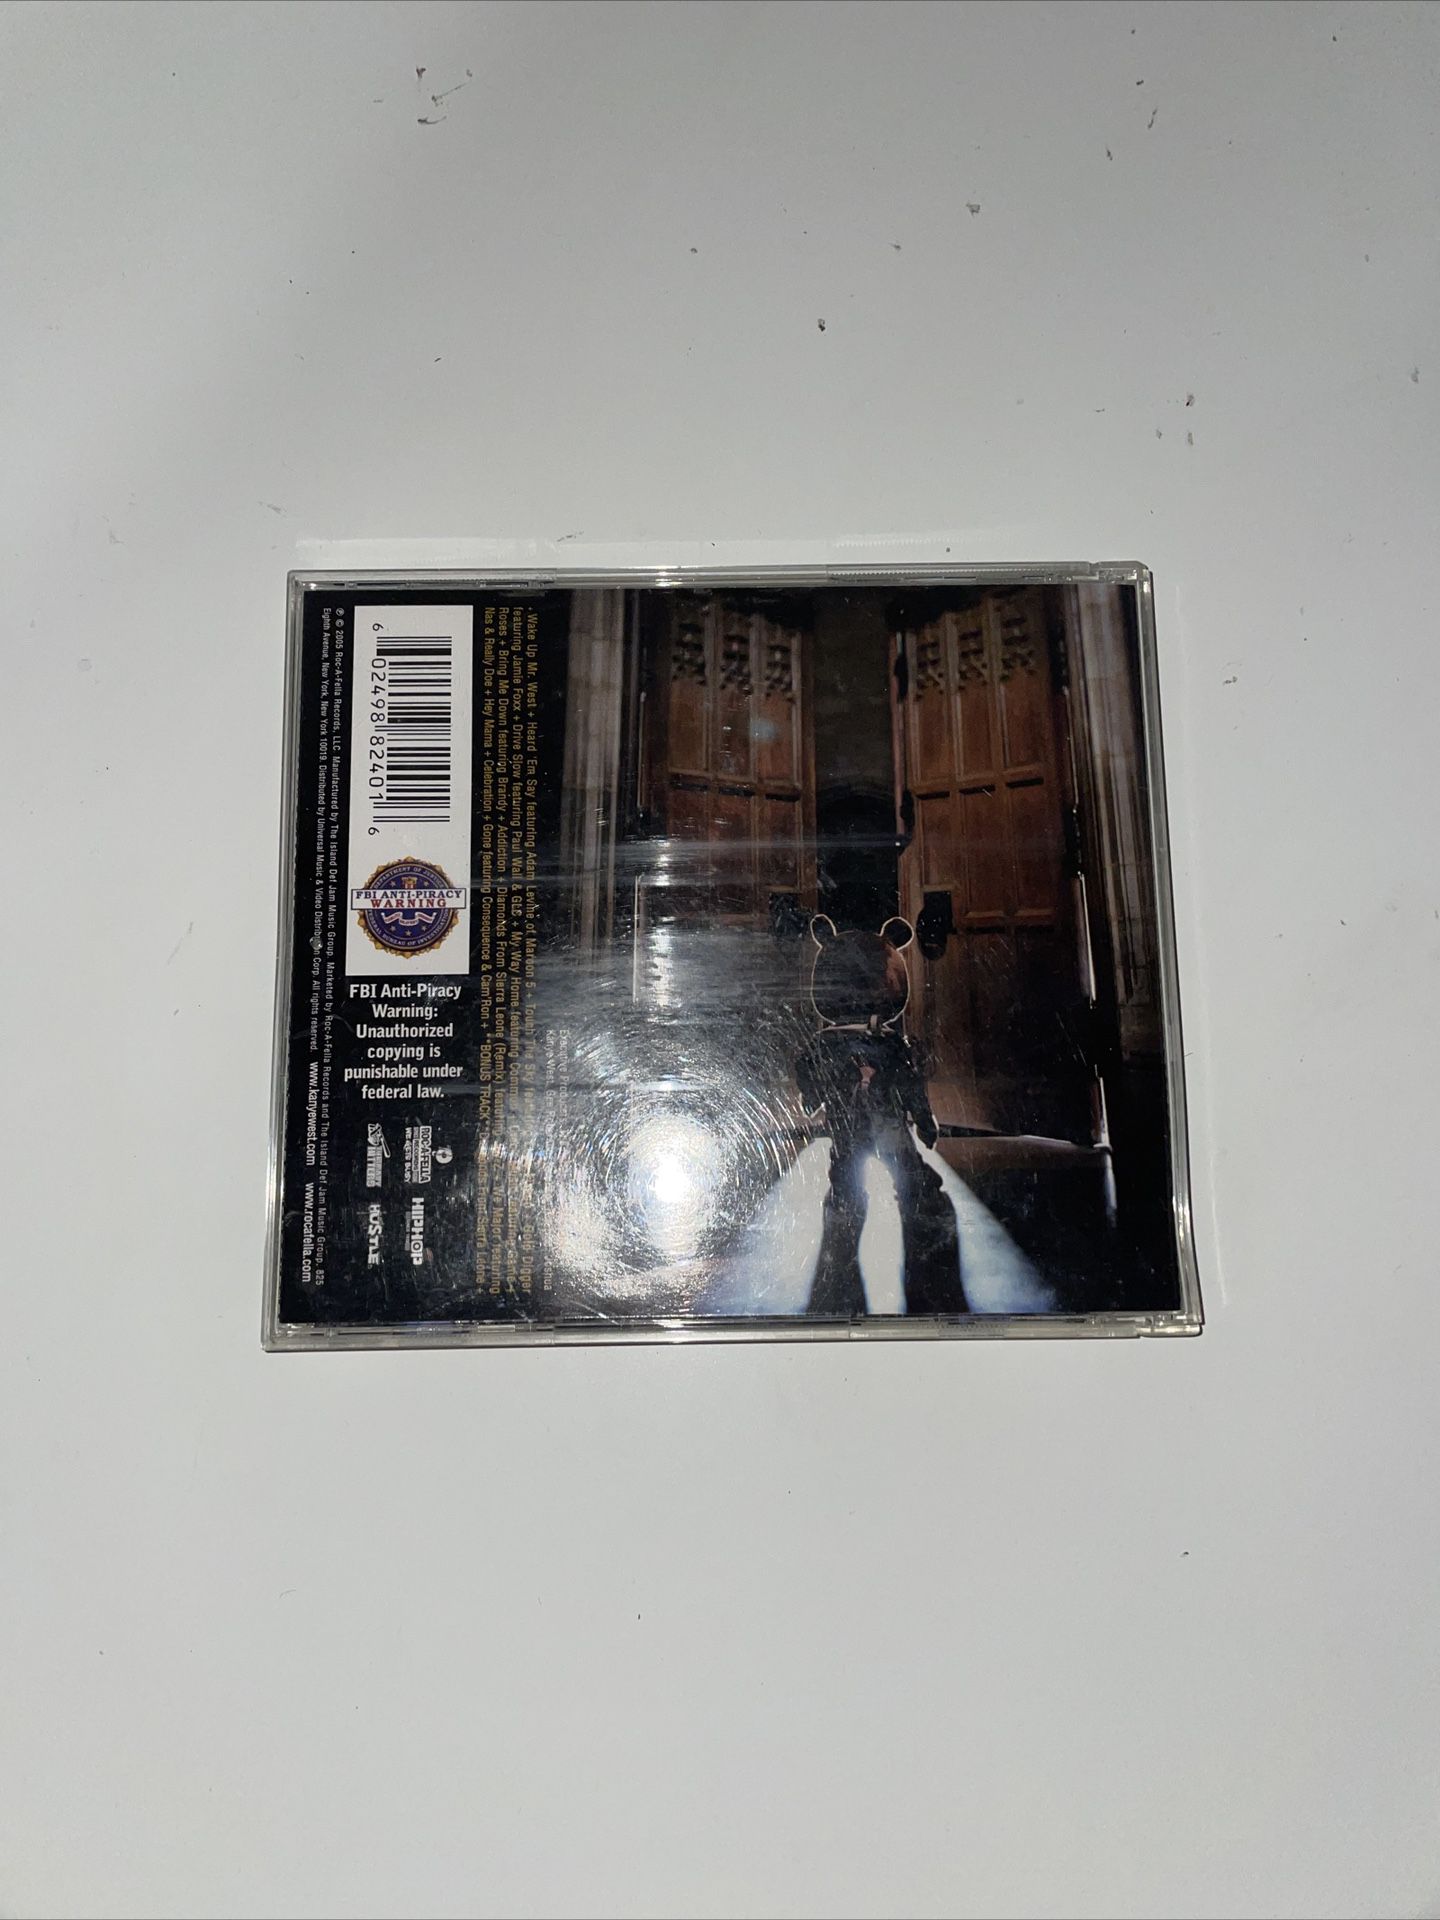 Late Registration by West, Kanye (CD, 2005)